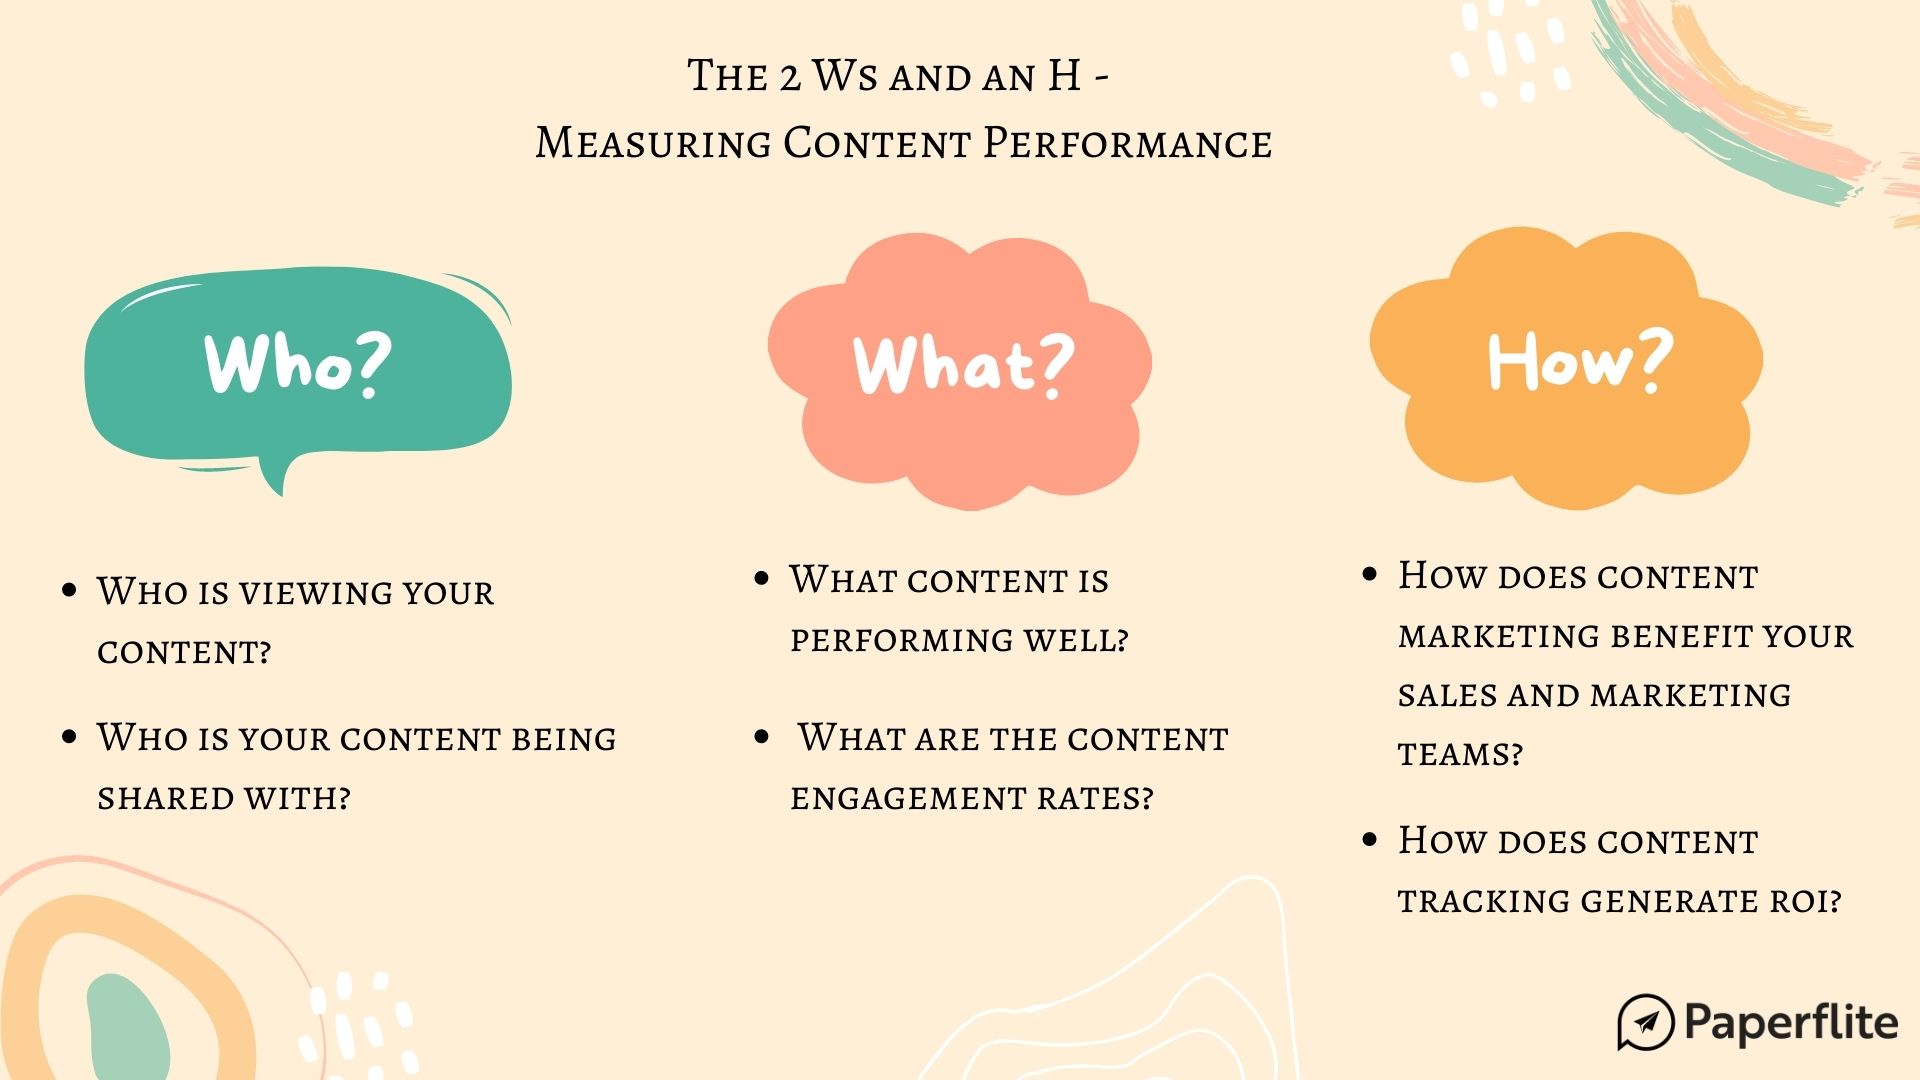 Creative of Questions to ask while measuring content performance by Paperflite